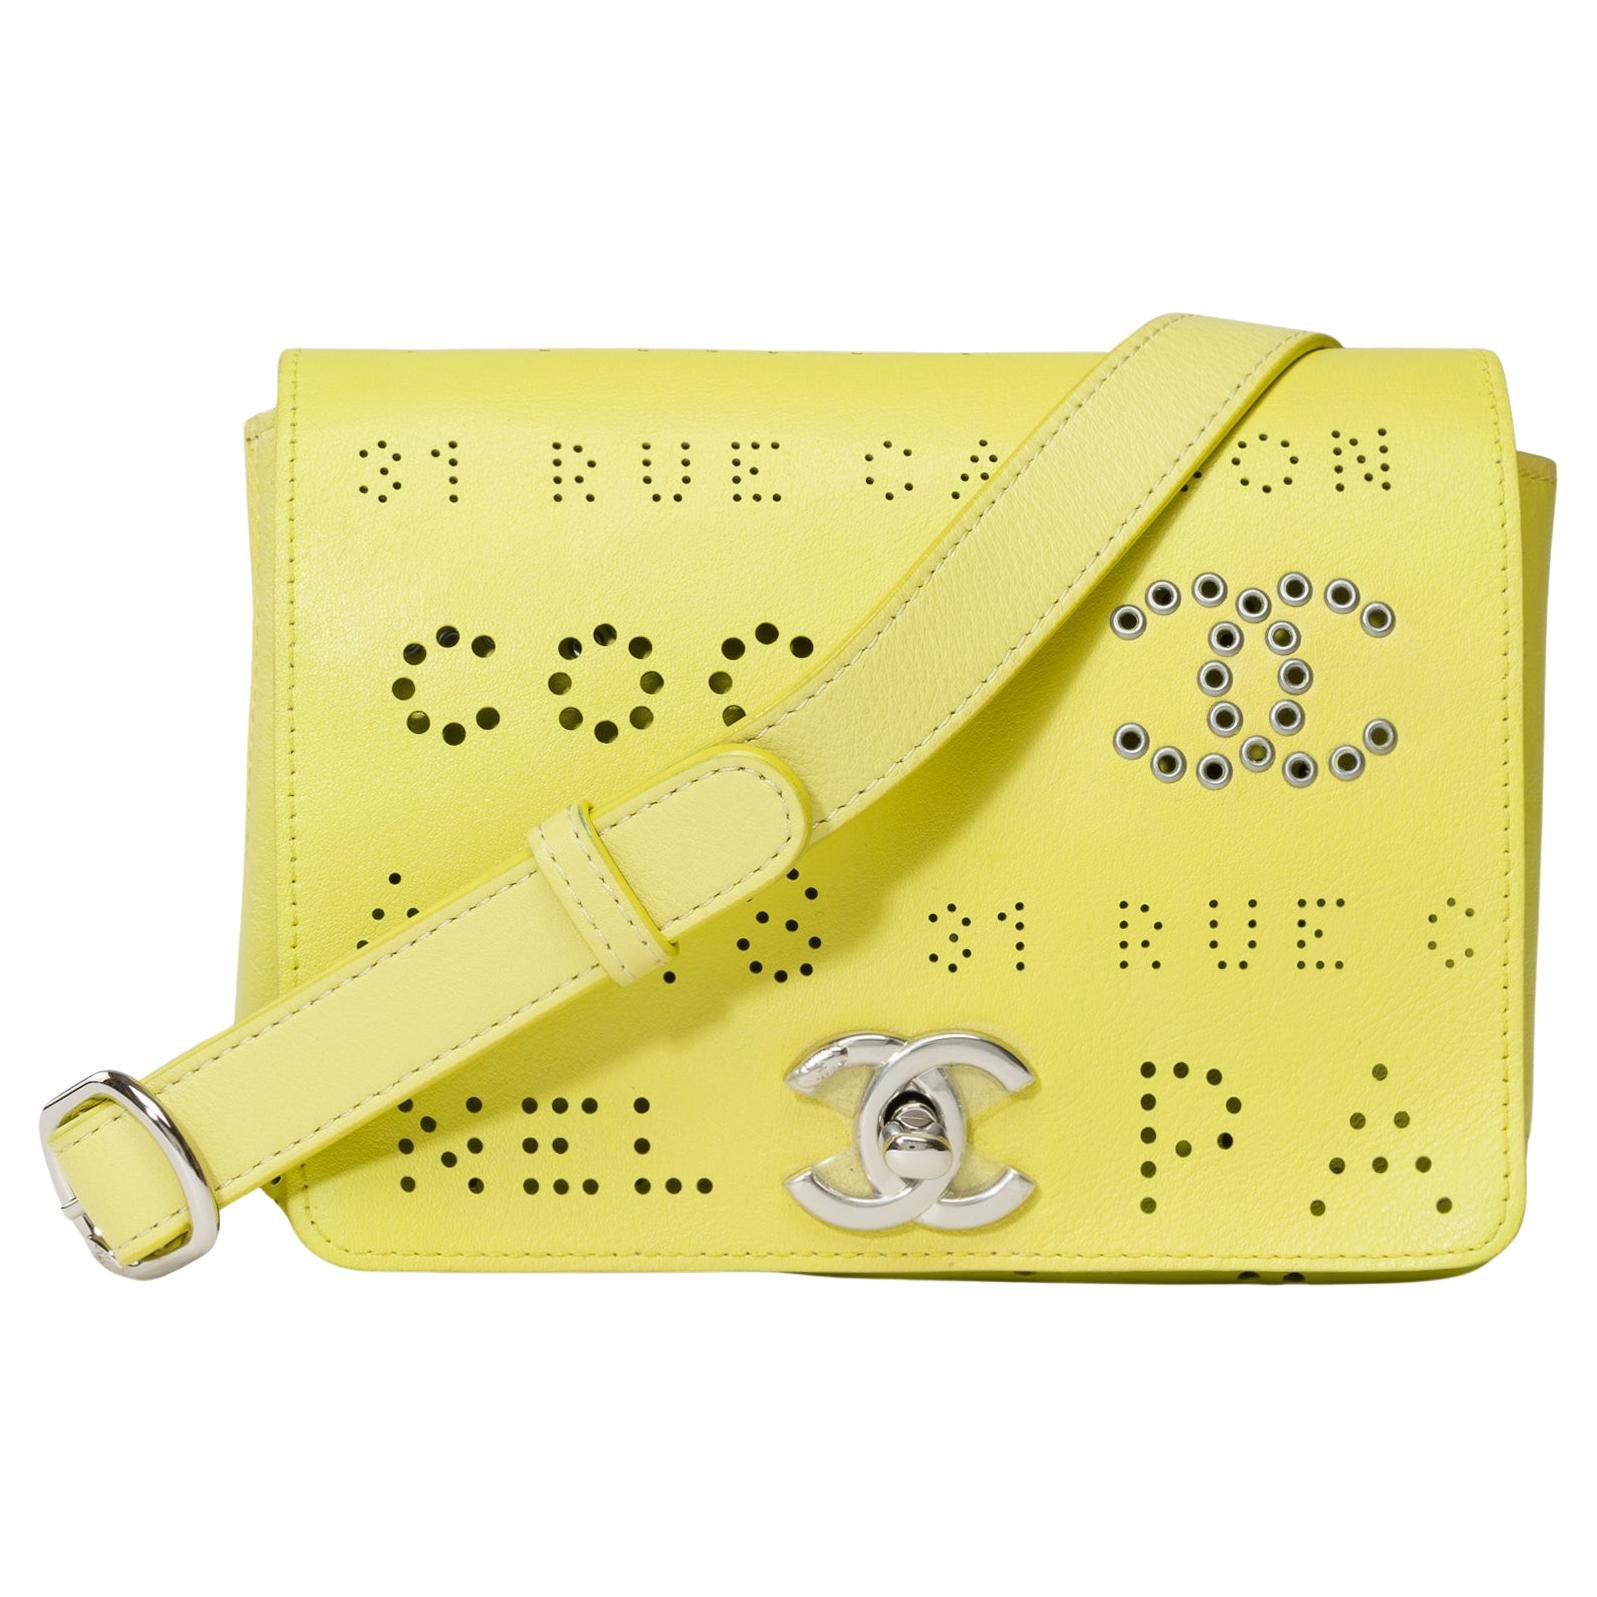 Chanel Classic shoulder flap bag in Yellow perforated leather, SHW